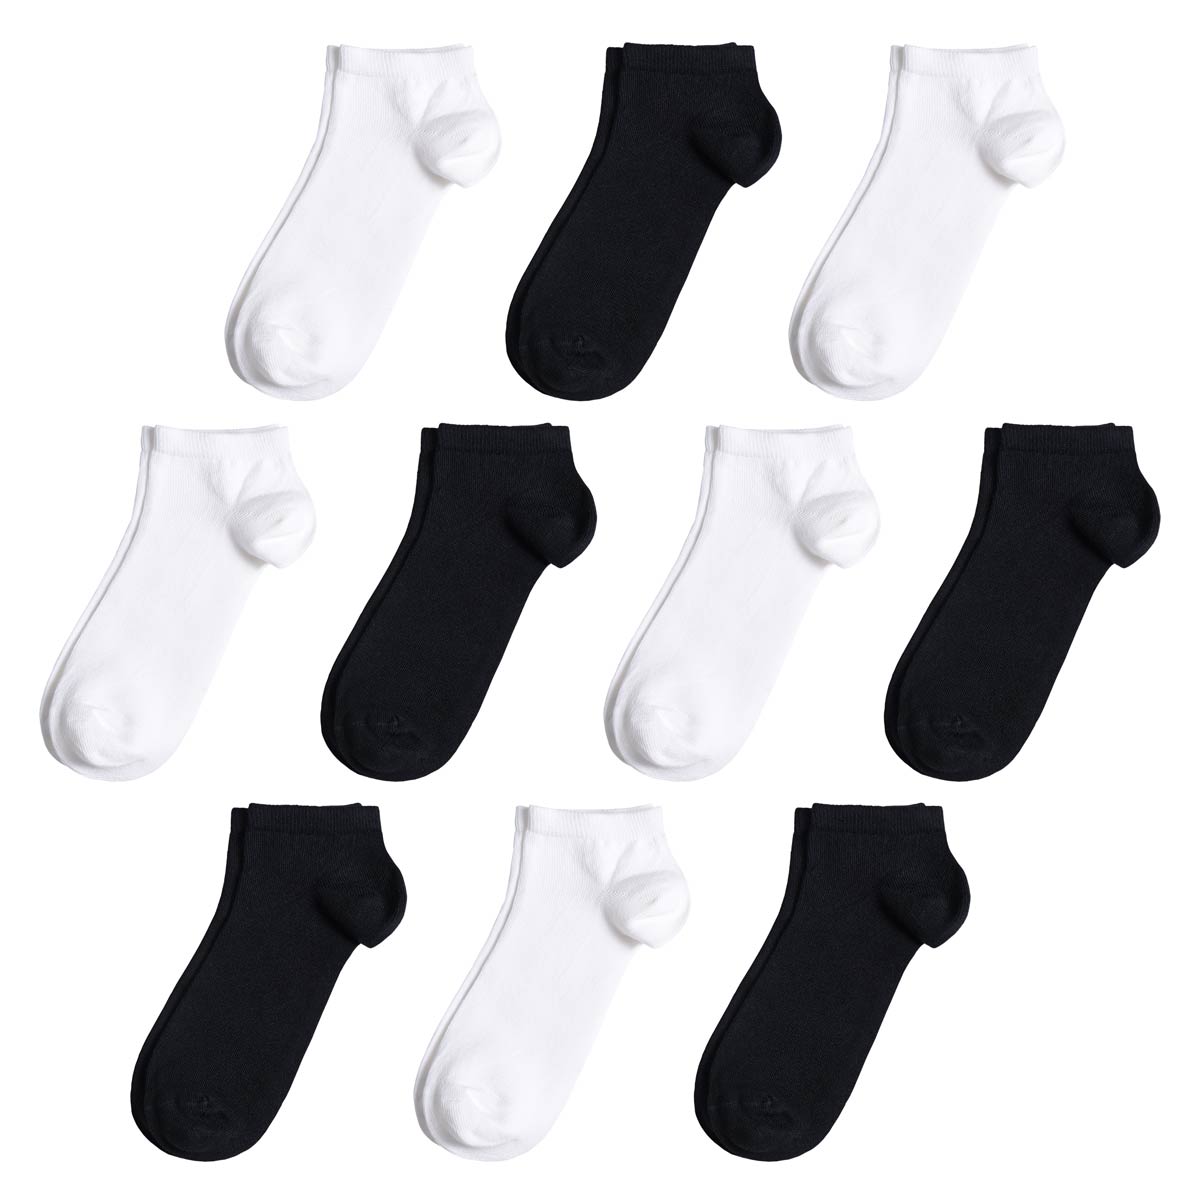 CH-00694_A12-1--_Soquettes-homme-blanches-lot-10-paires-assorties-noir-blanc